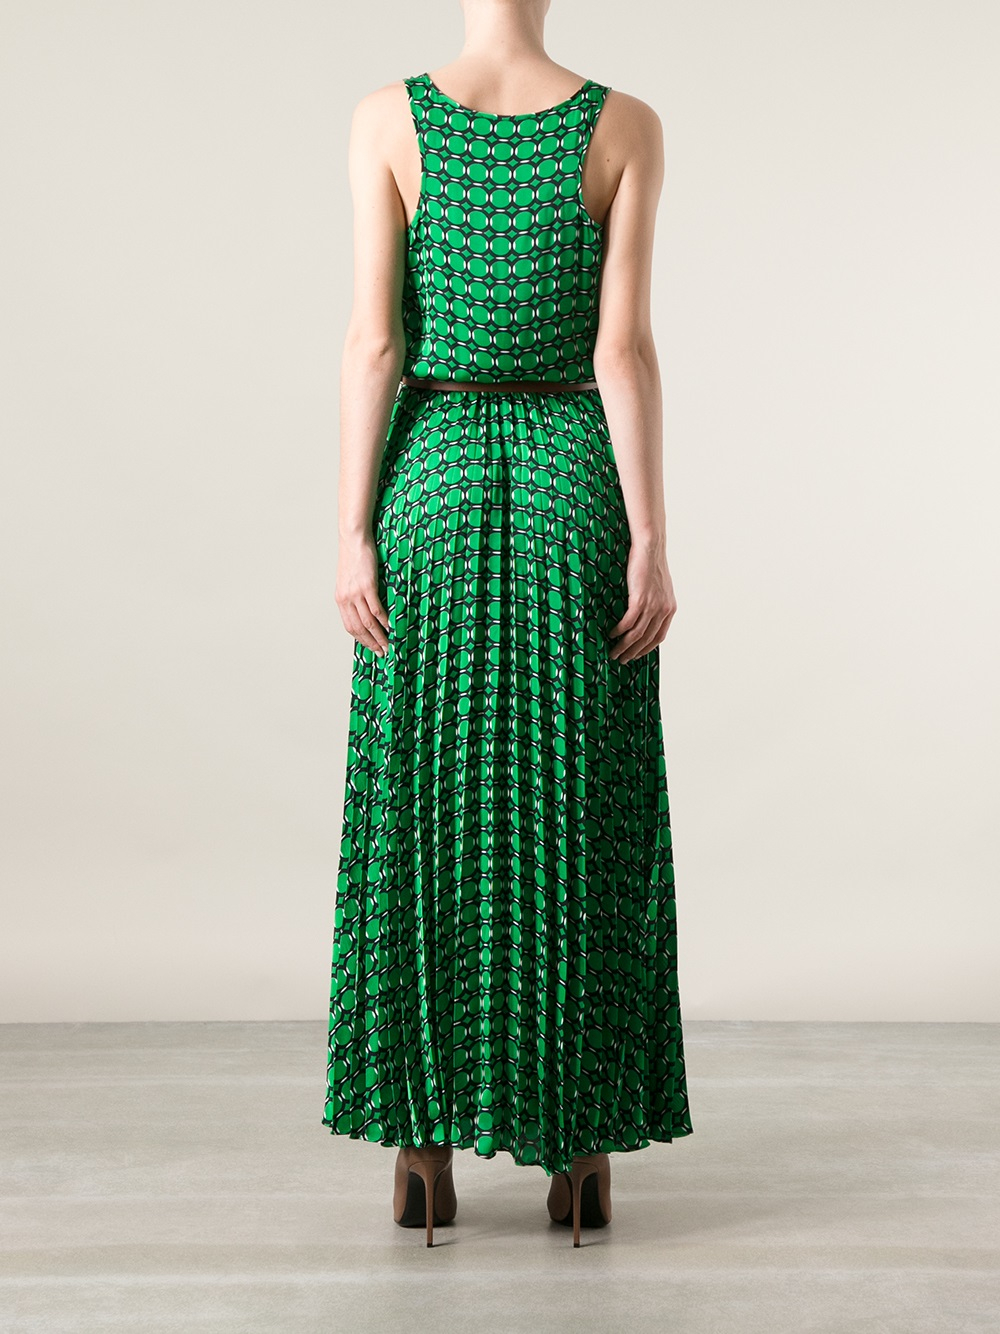 MICHAEL Michael Kors Belted Patterned Dress in Green - Lyst